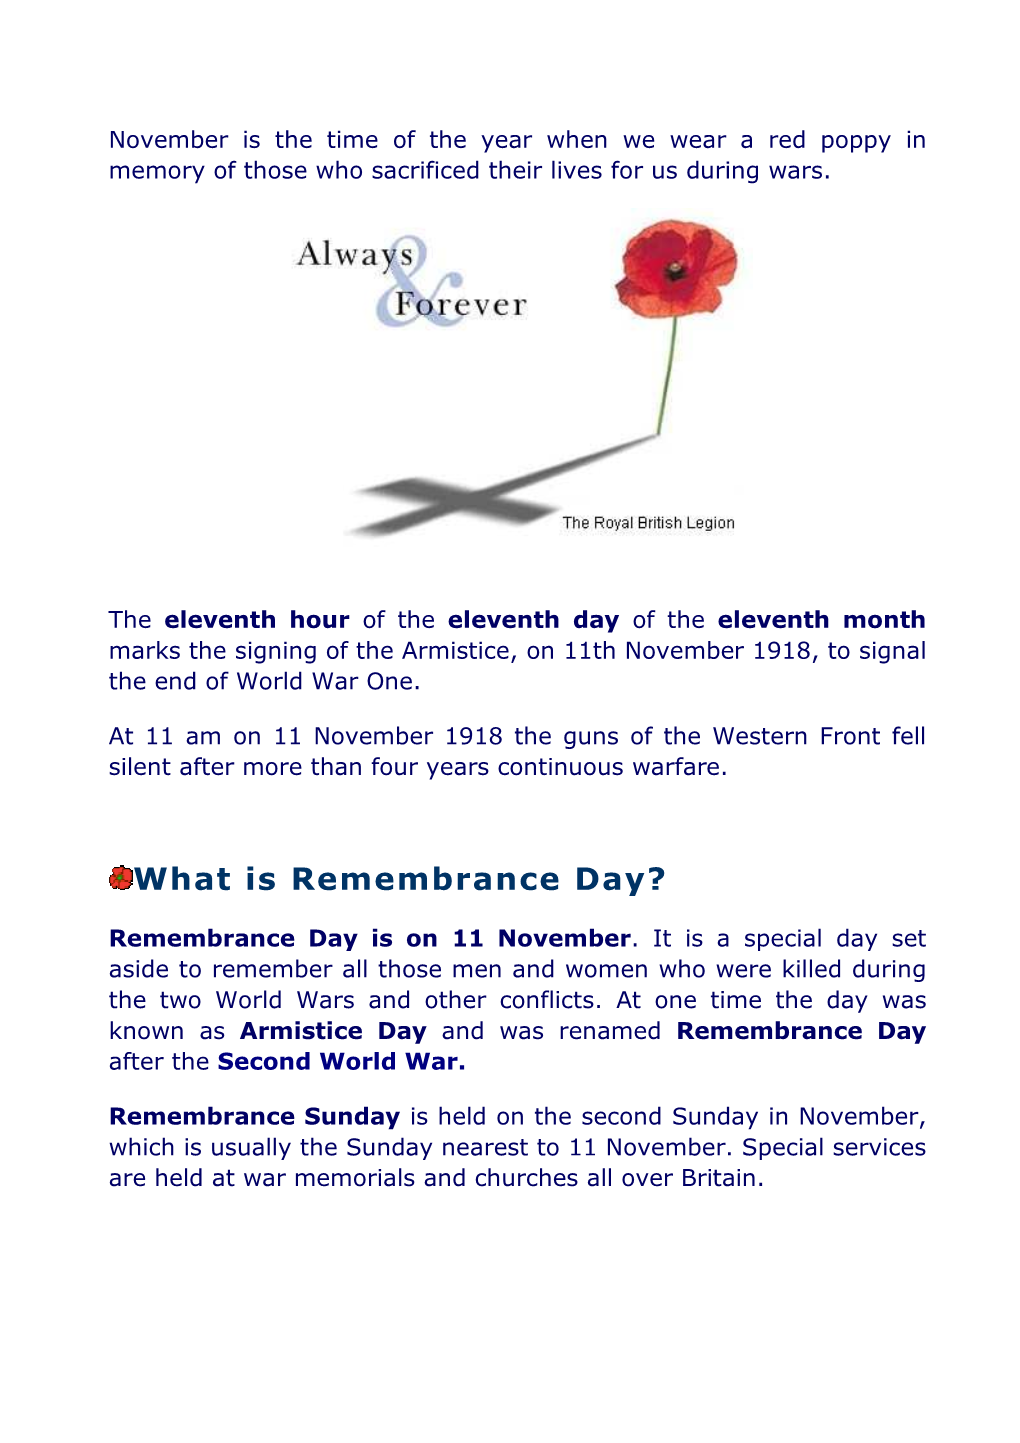 Remembrance Day?